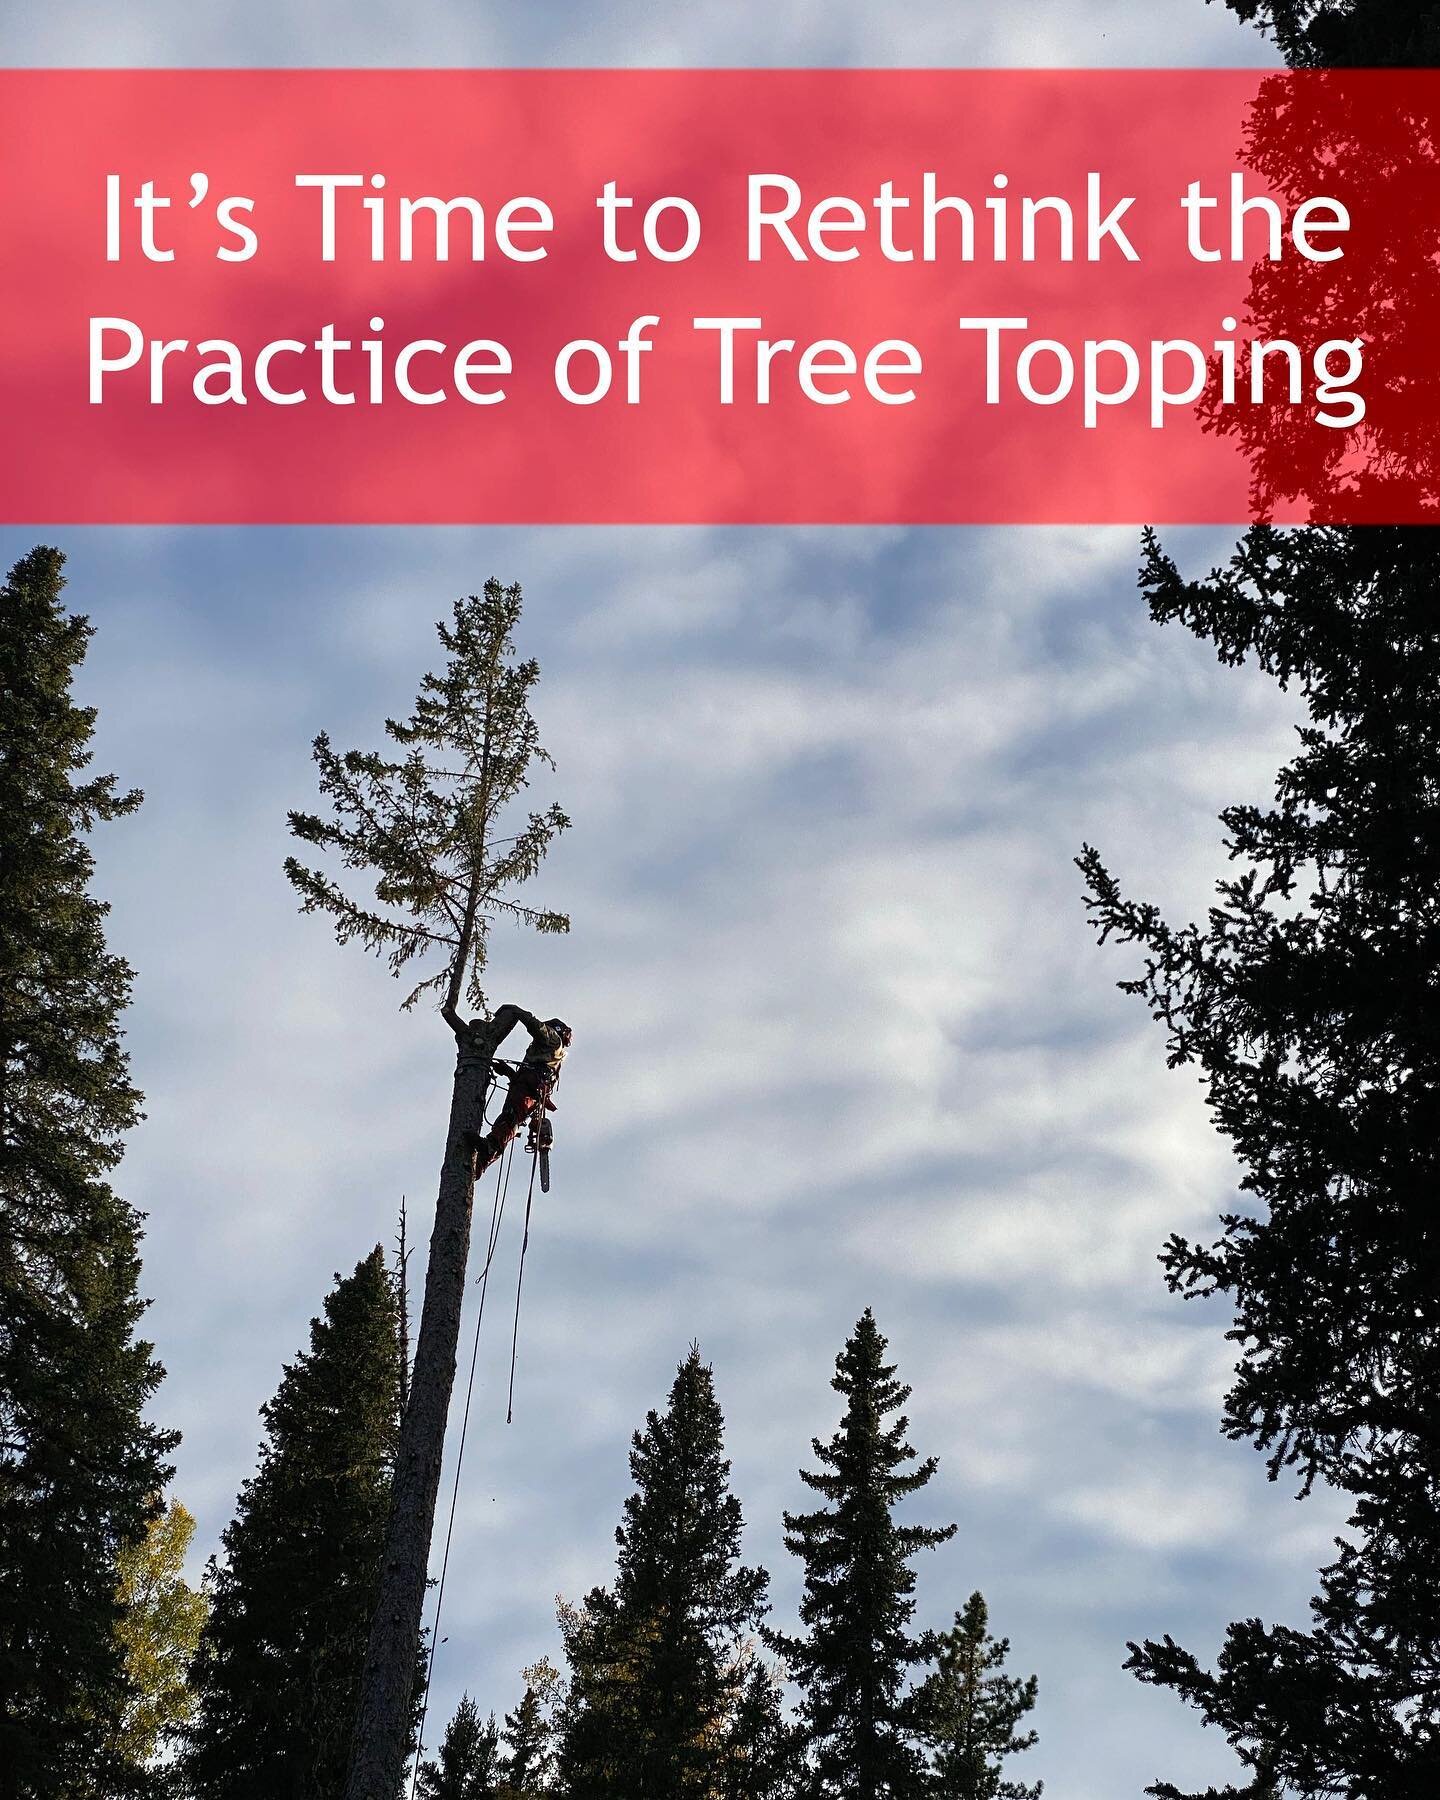 Have you ever been curious about getting your trees topped?

&lsquo;Tree Topping&rsquo;, often referred to as &lsquo;Top Reduction&rsquo; by various companies, is the process of cutting a tree off somewhere within the canopy for the purpose of shorte